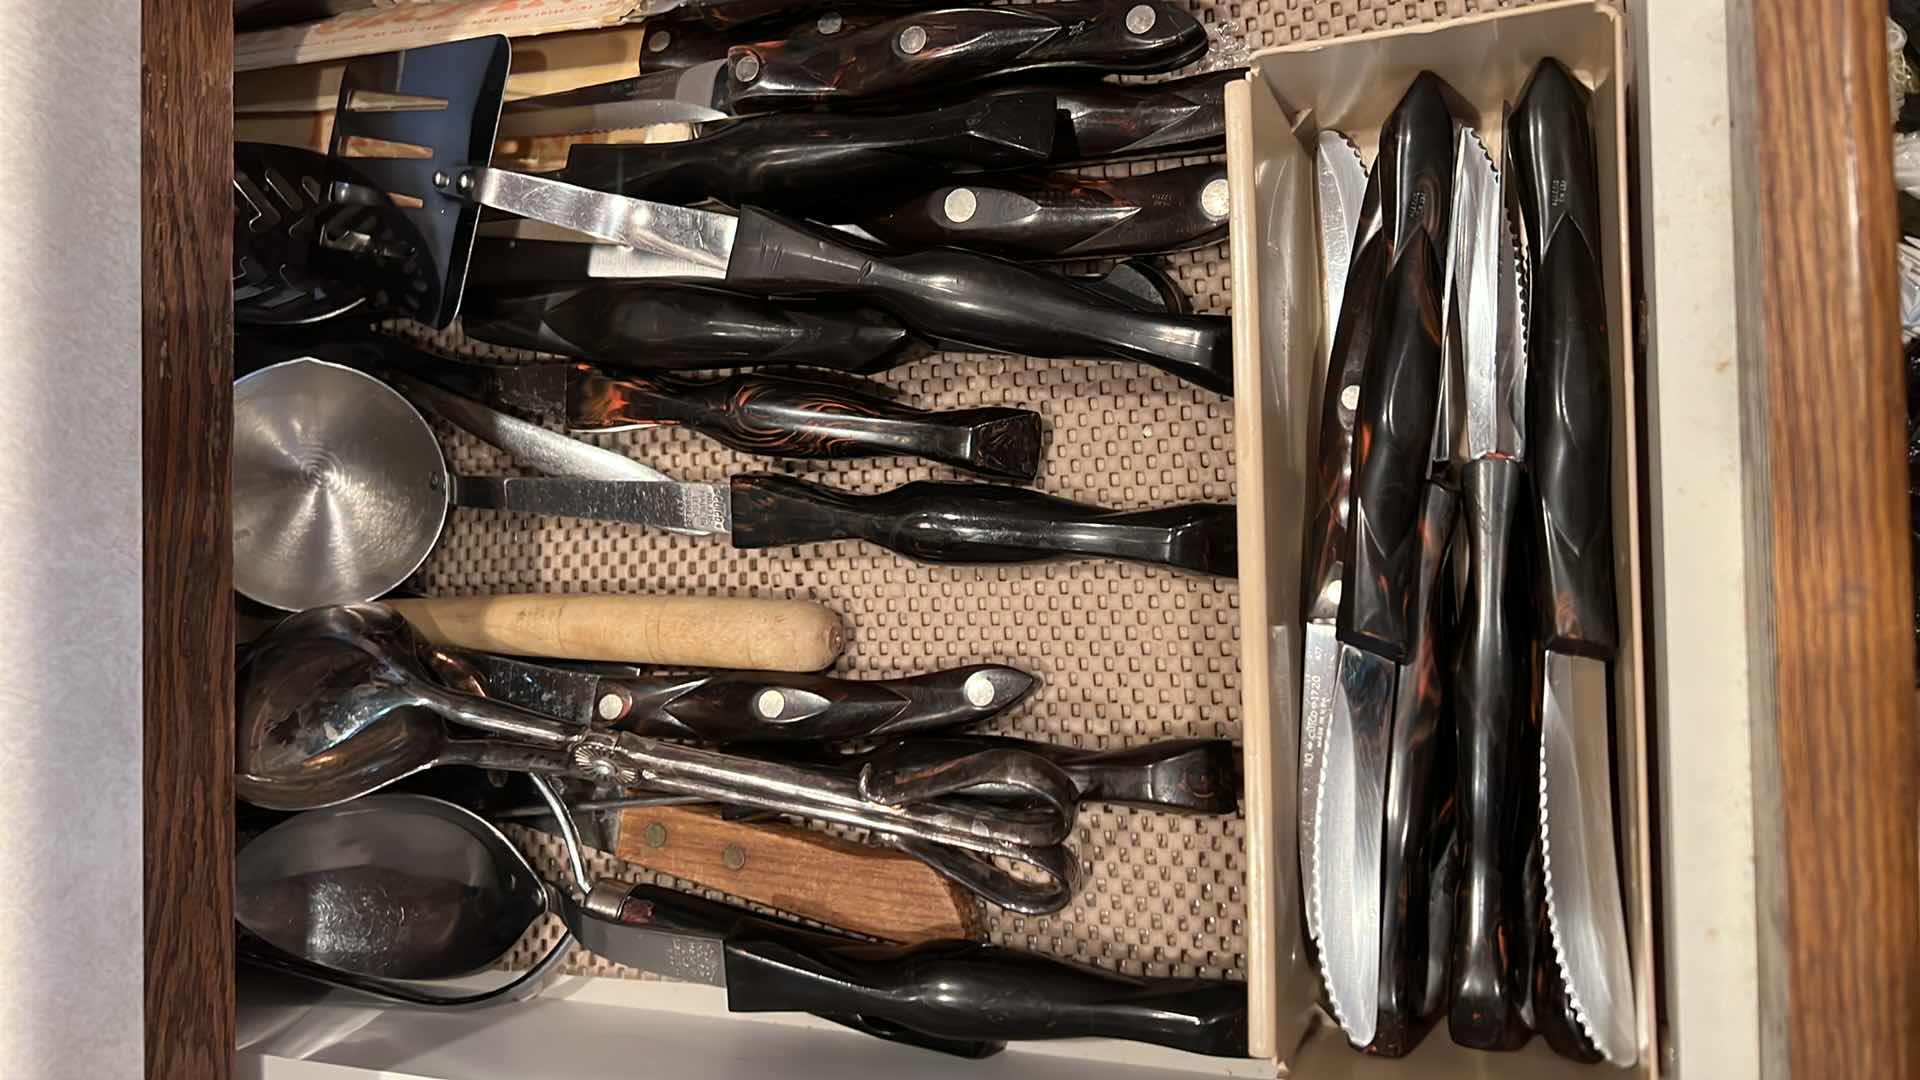 Photo 1 of CONTENTS OF KITCHEN DRAWER -KNIVES & UTENSILS